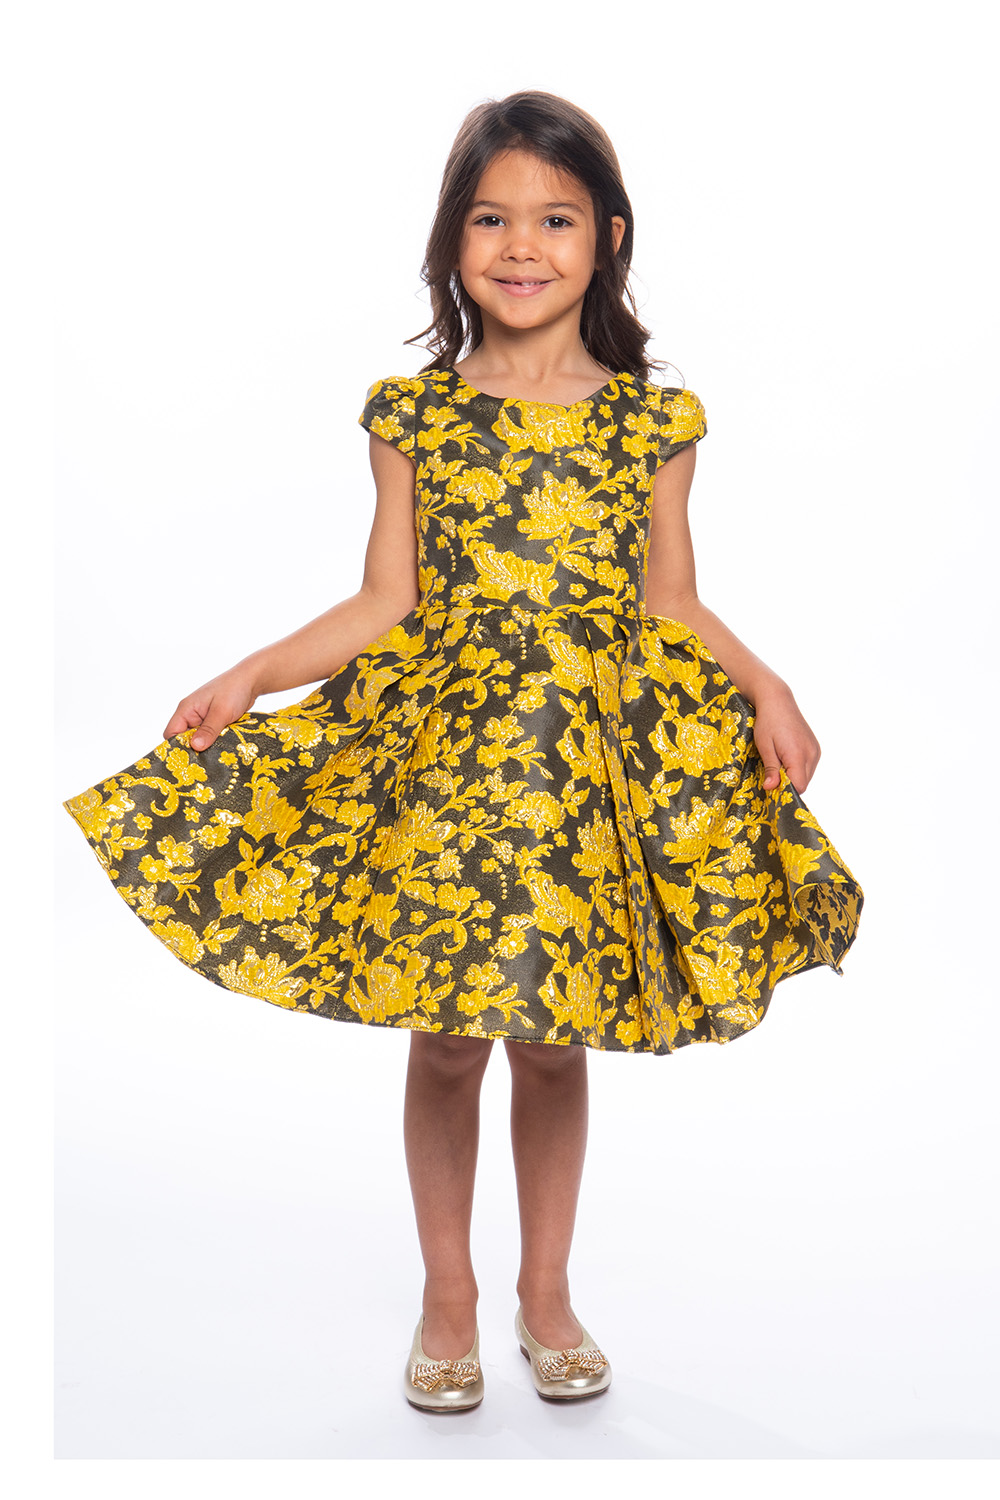 Black and Yellow Floral Prom Dress